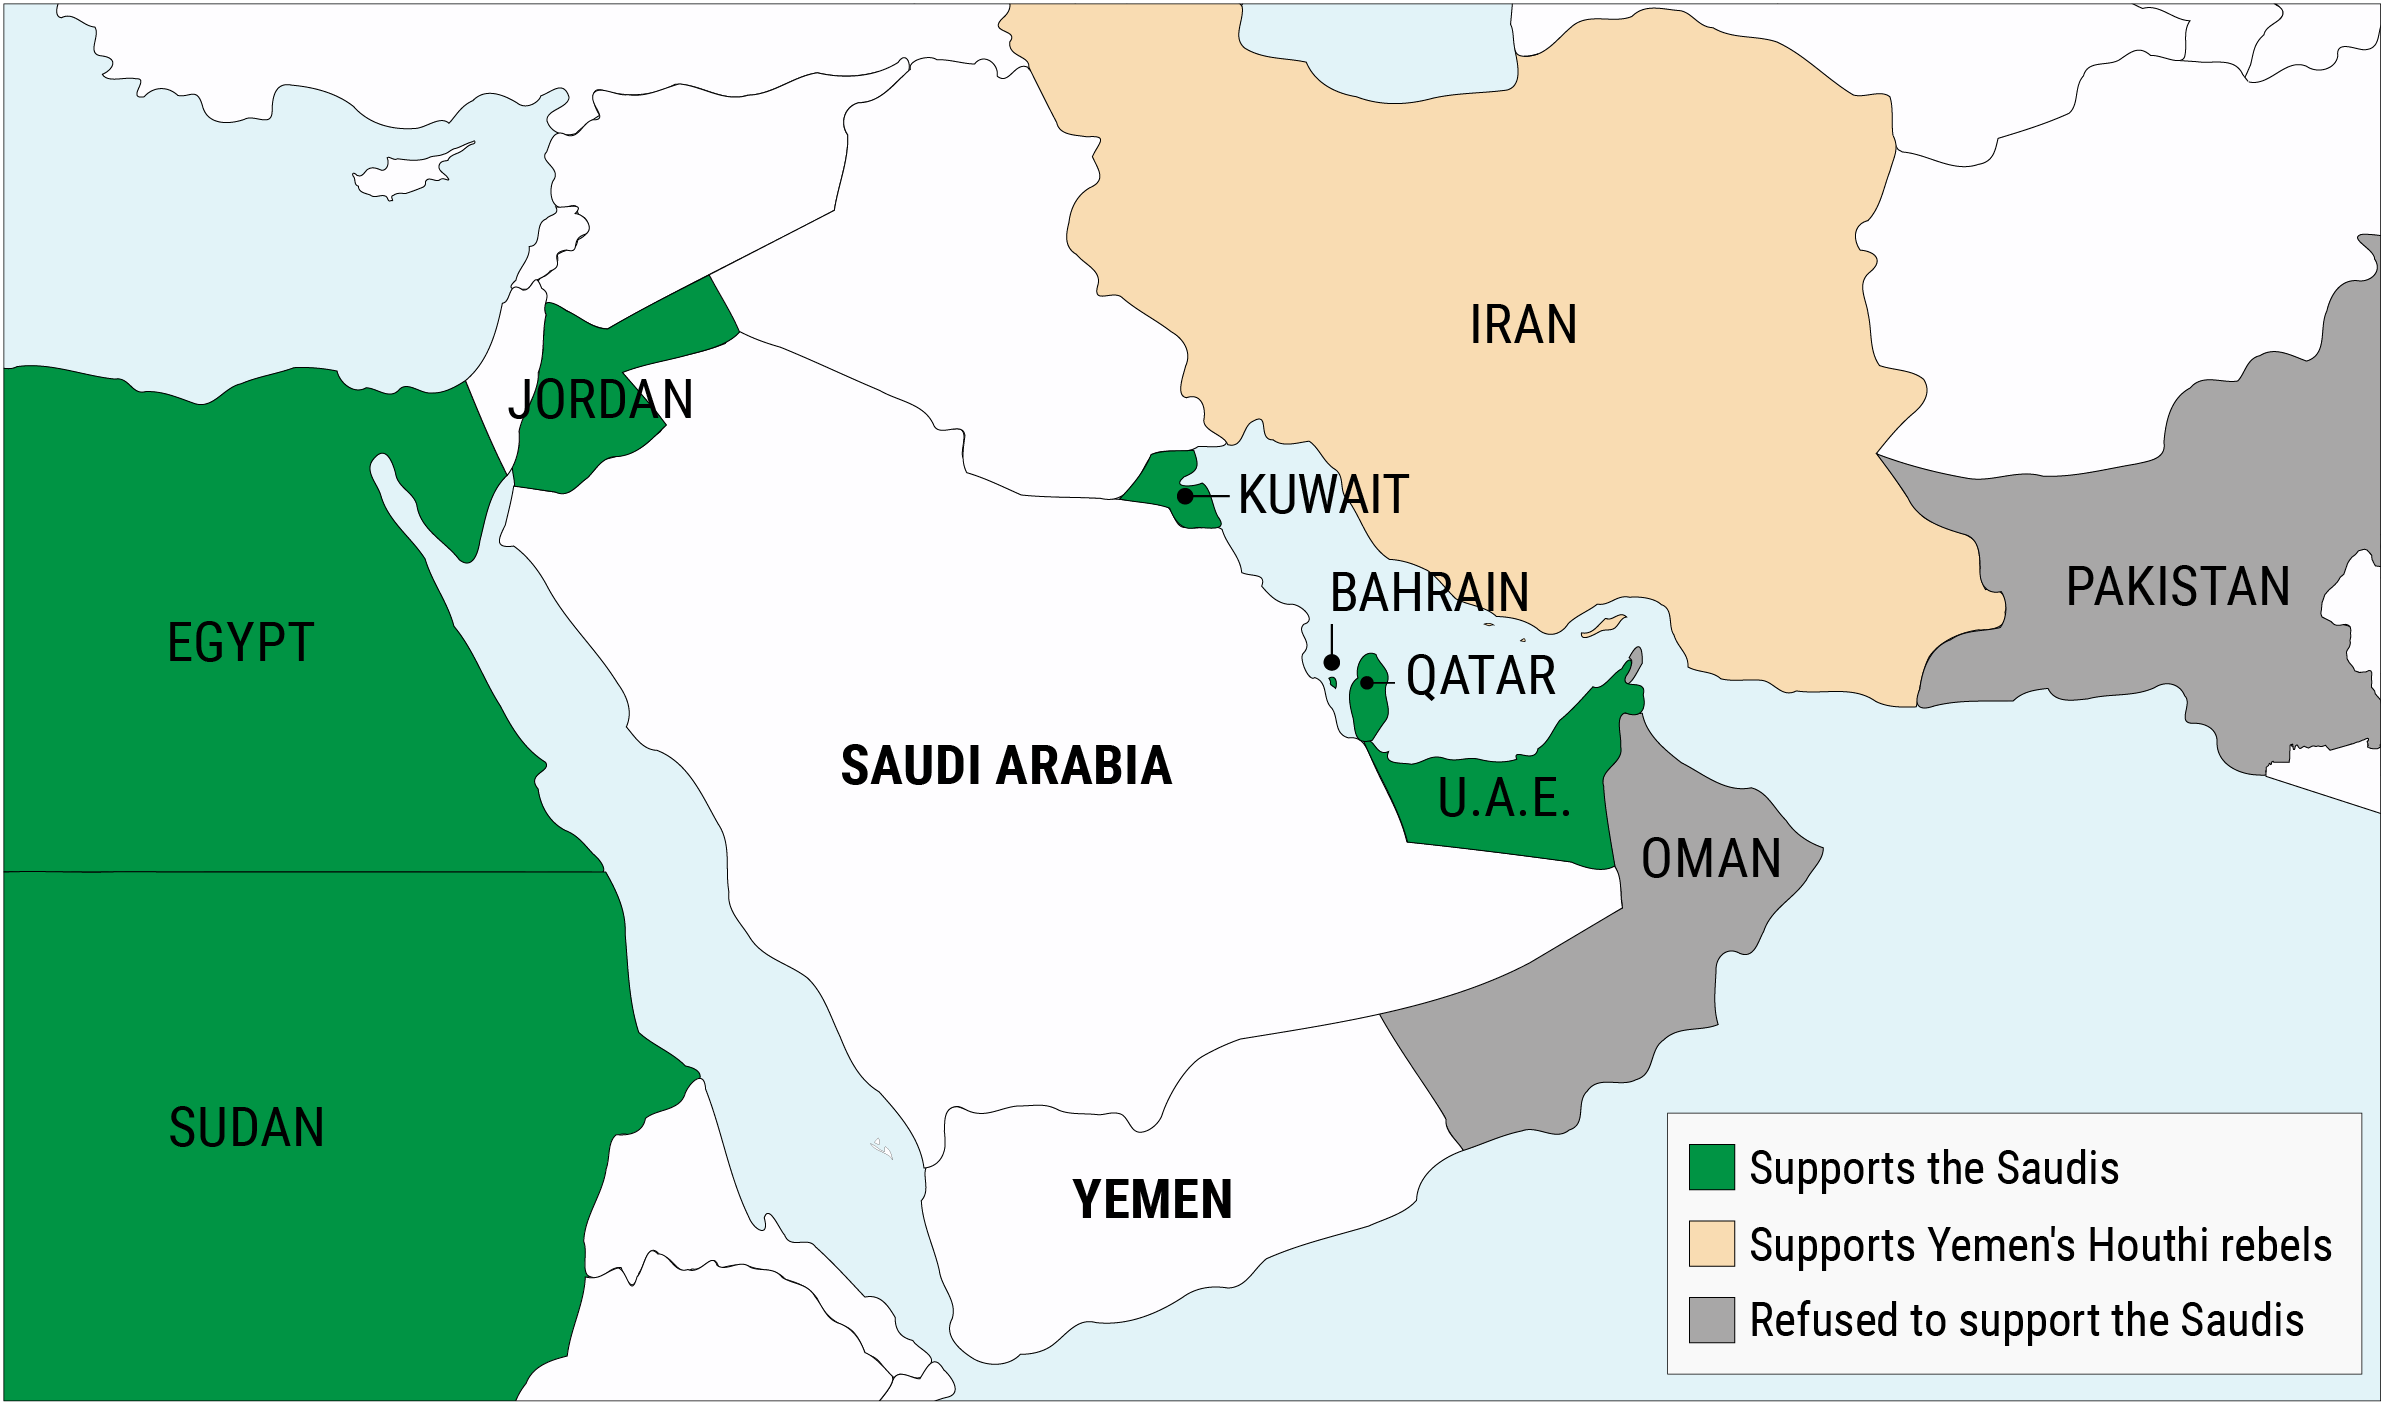 Backed by the U.S., Saudi Arabia's coalition against Yemen comprises fellow Gulf nations as well as Egypt and Sudan.